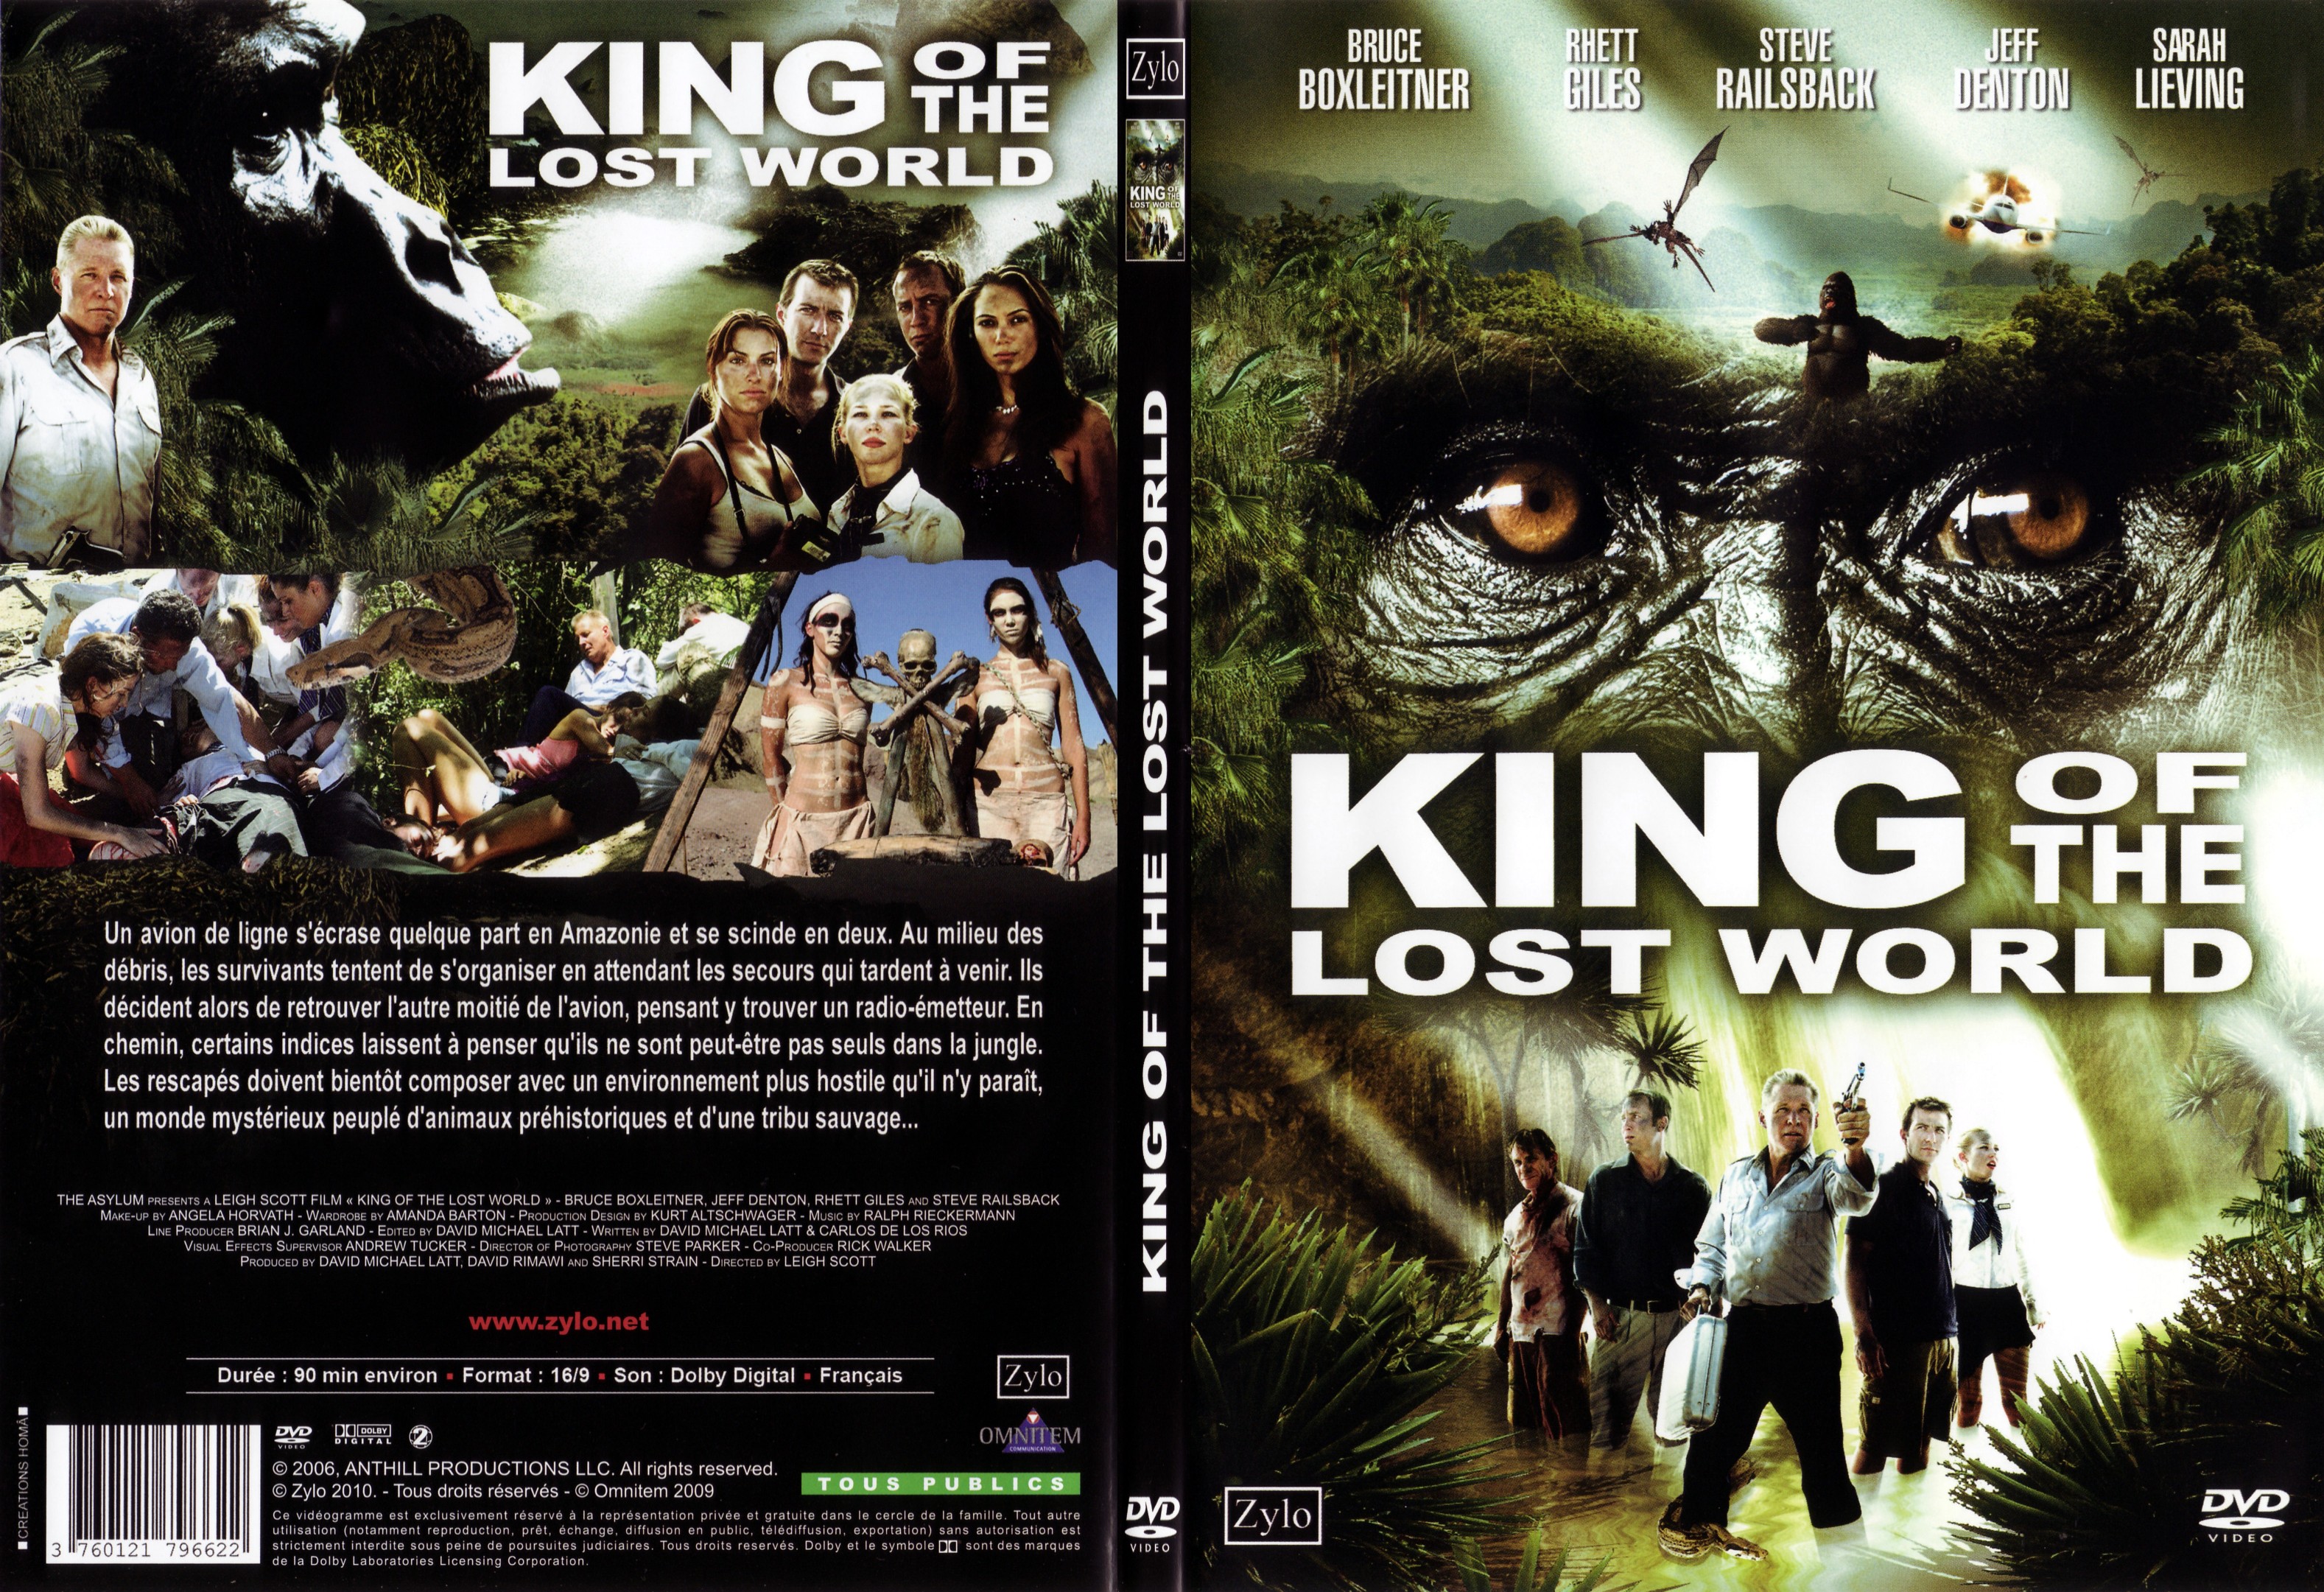 Jaquette DVD King of the lost world - SLIM